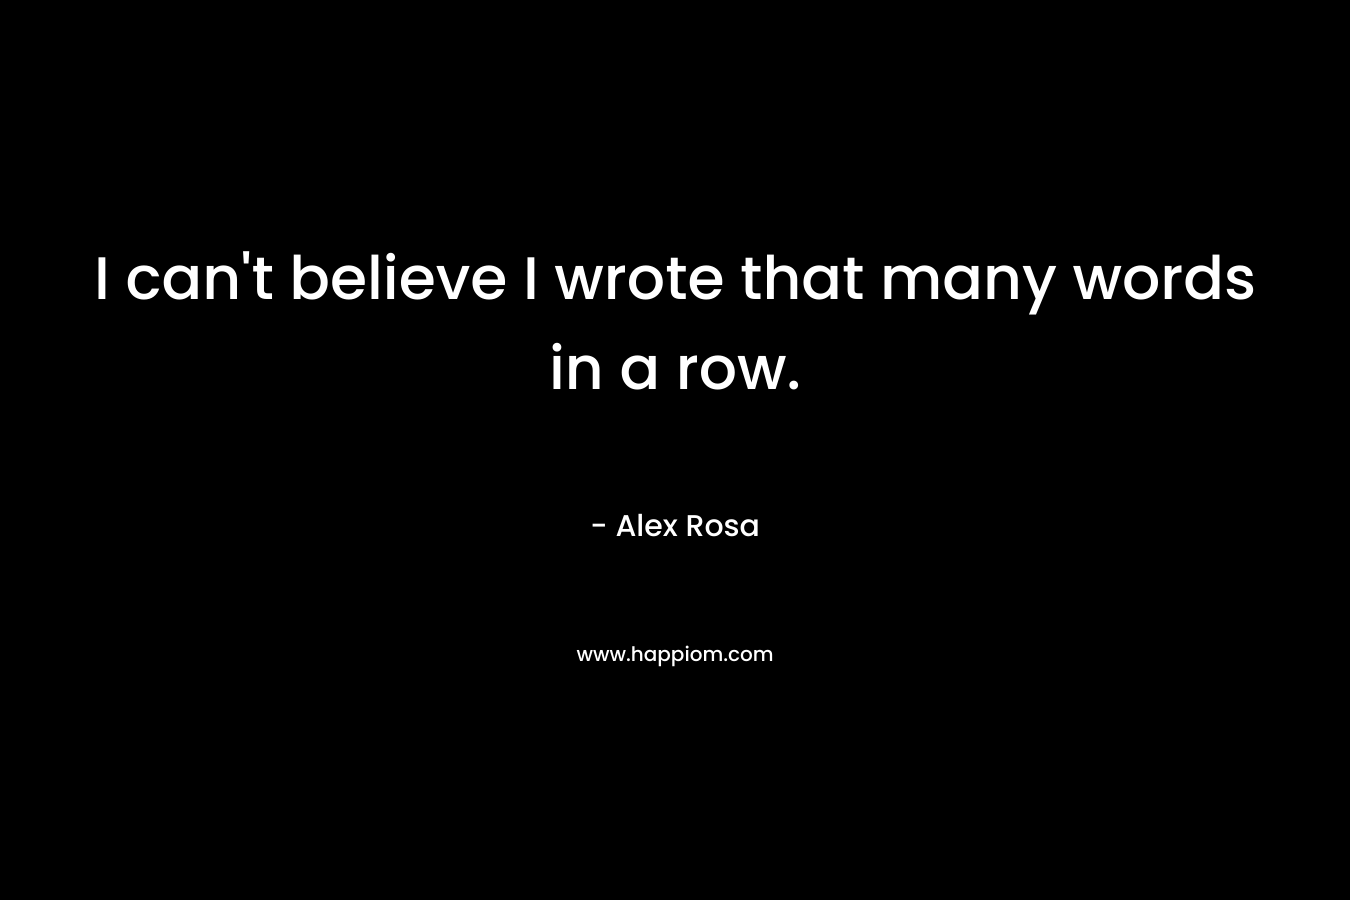 I can’t believe I wrote that many words in a row. – Alex Rosa